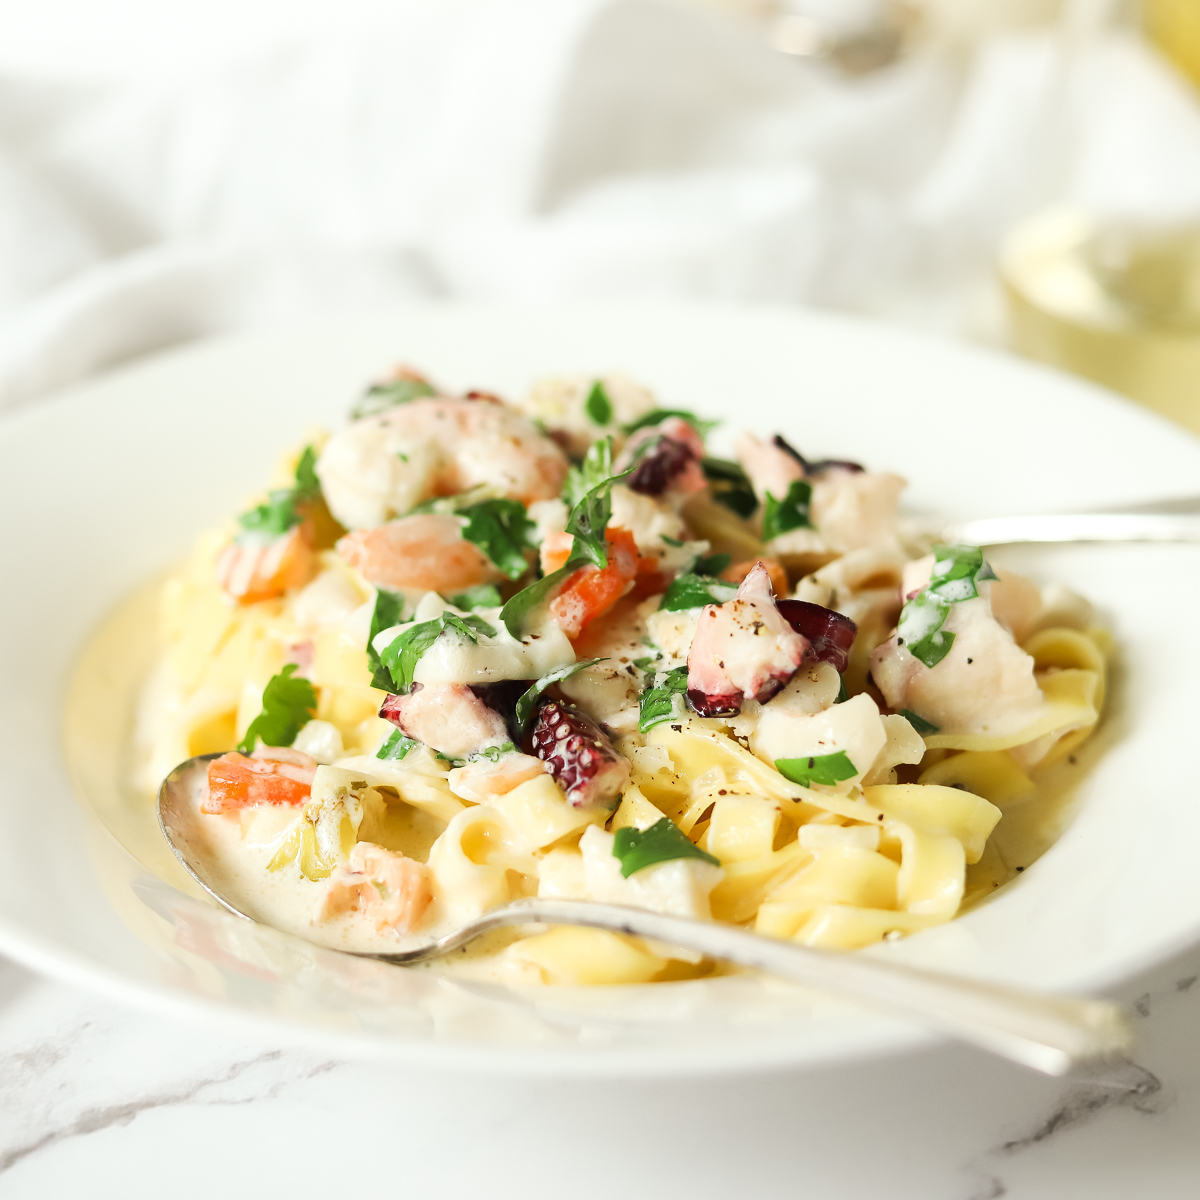 White wide rimmed bowl filled with red, white and purple assorted seafood chunks over fettuccini pasta.